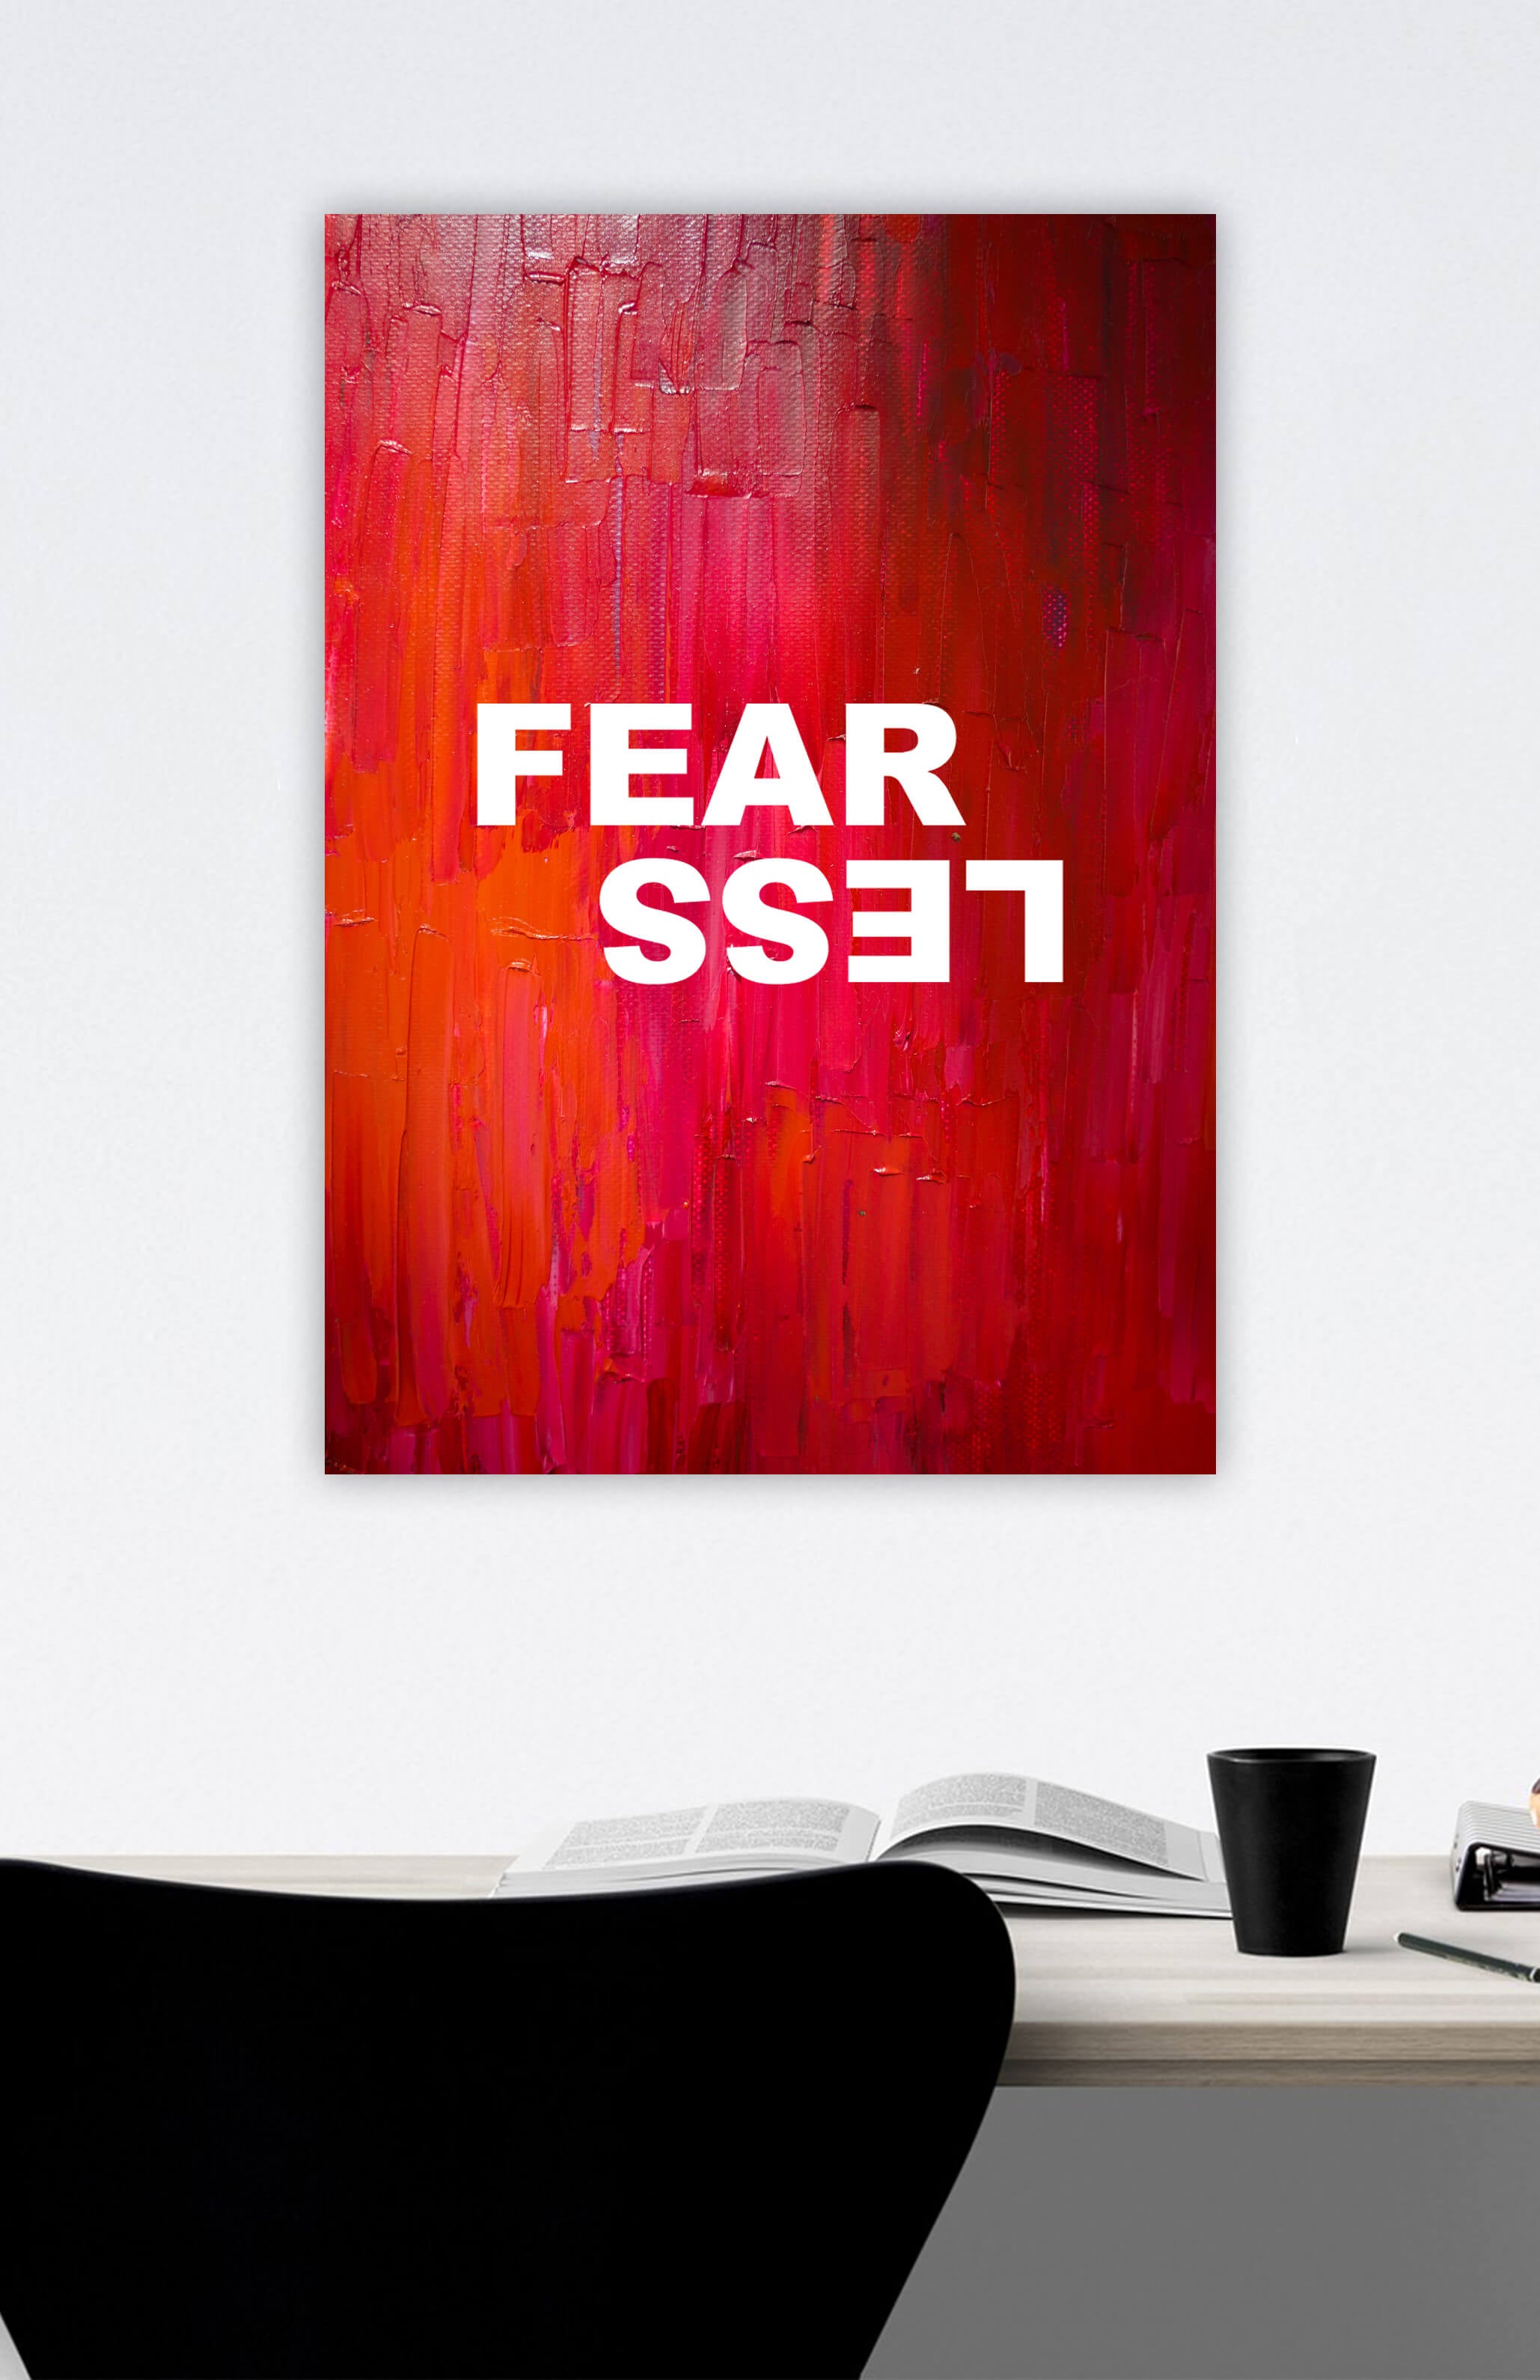 V3 Apparel womens fearless, Motivational posters, mens inspirational wall artwork and empowering poster quote designs for office, home gym, school, kitchen and living room.